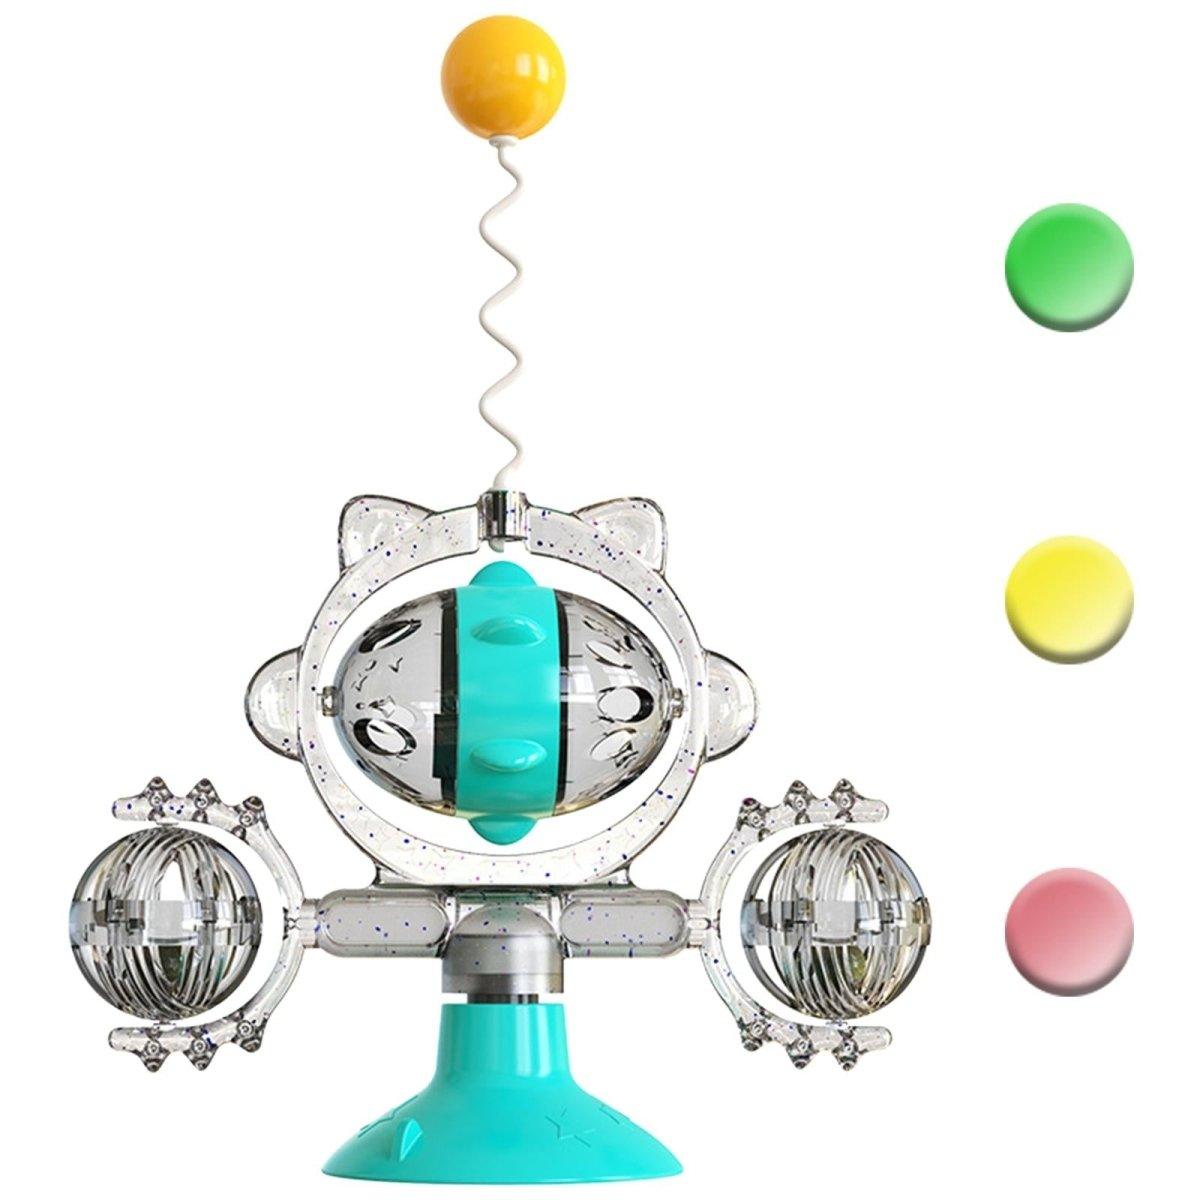 Suction Cup Fixing Leaking Funny Turntable Cat Toy - Pretty Little Wish.com